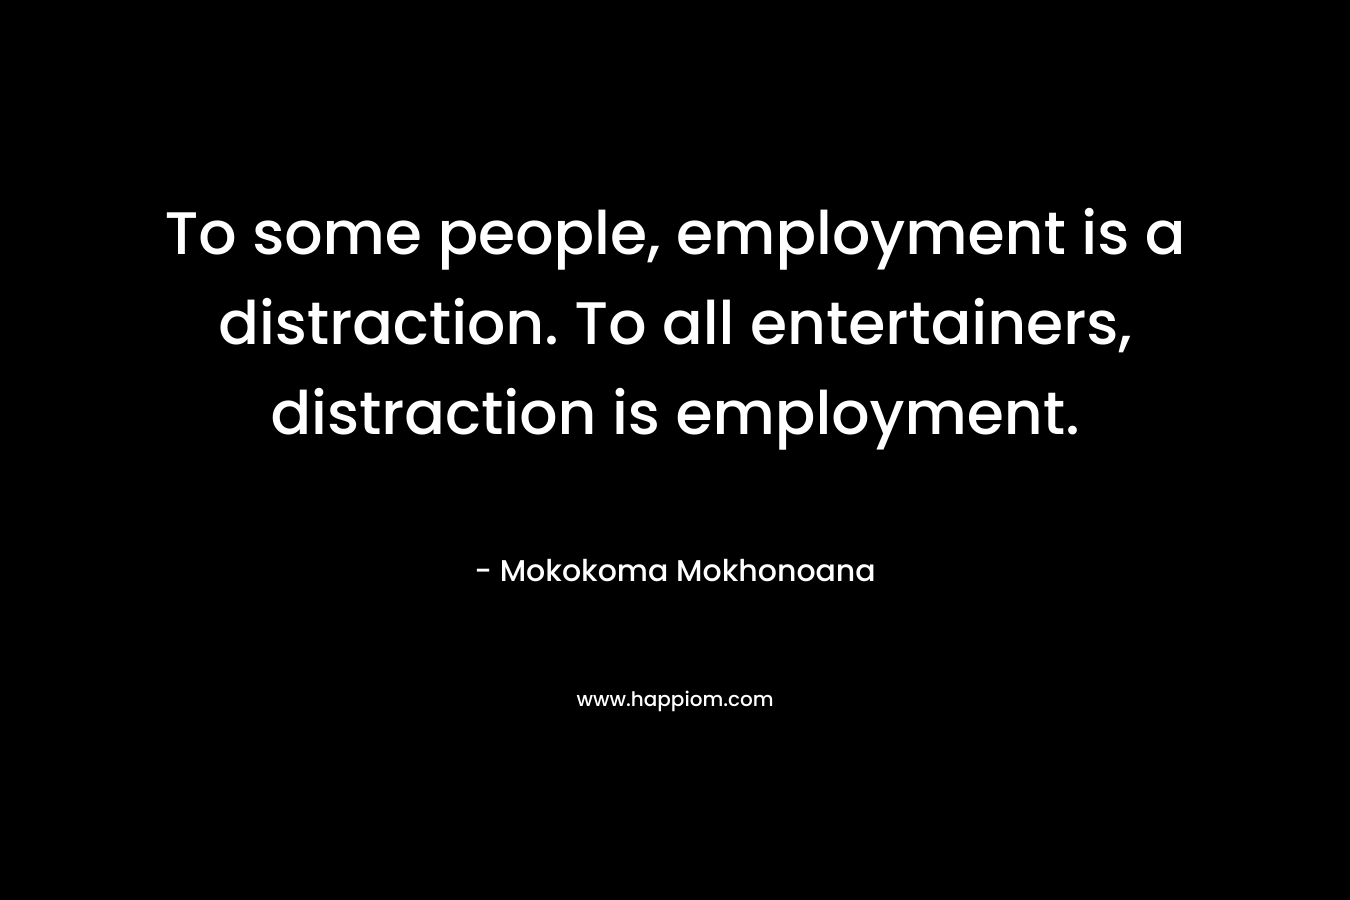 To some people, employment is a distraction. To all entertainers, distraction is employment.